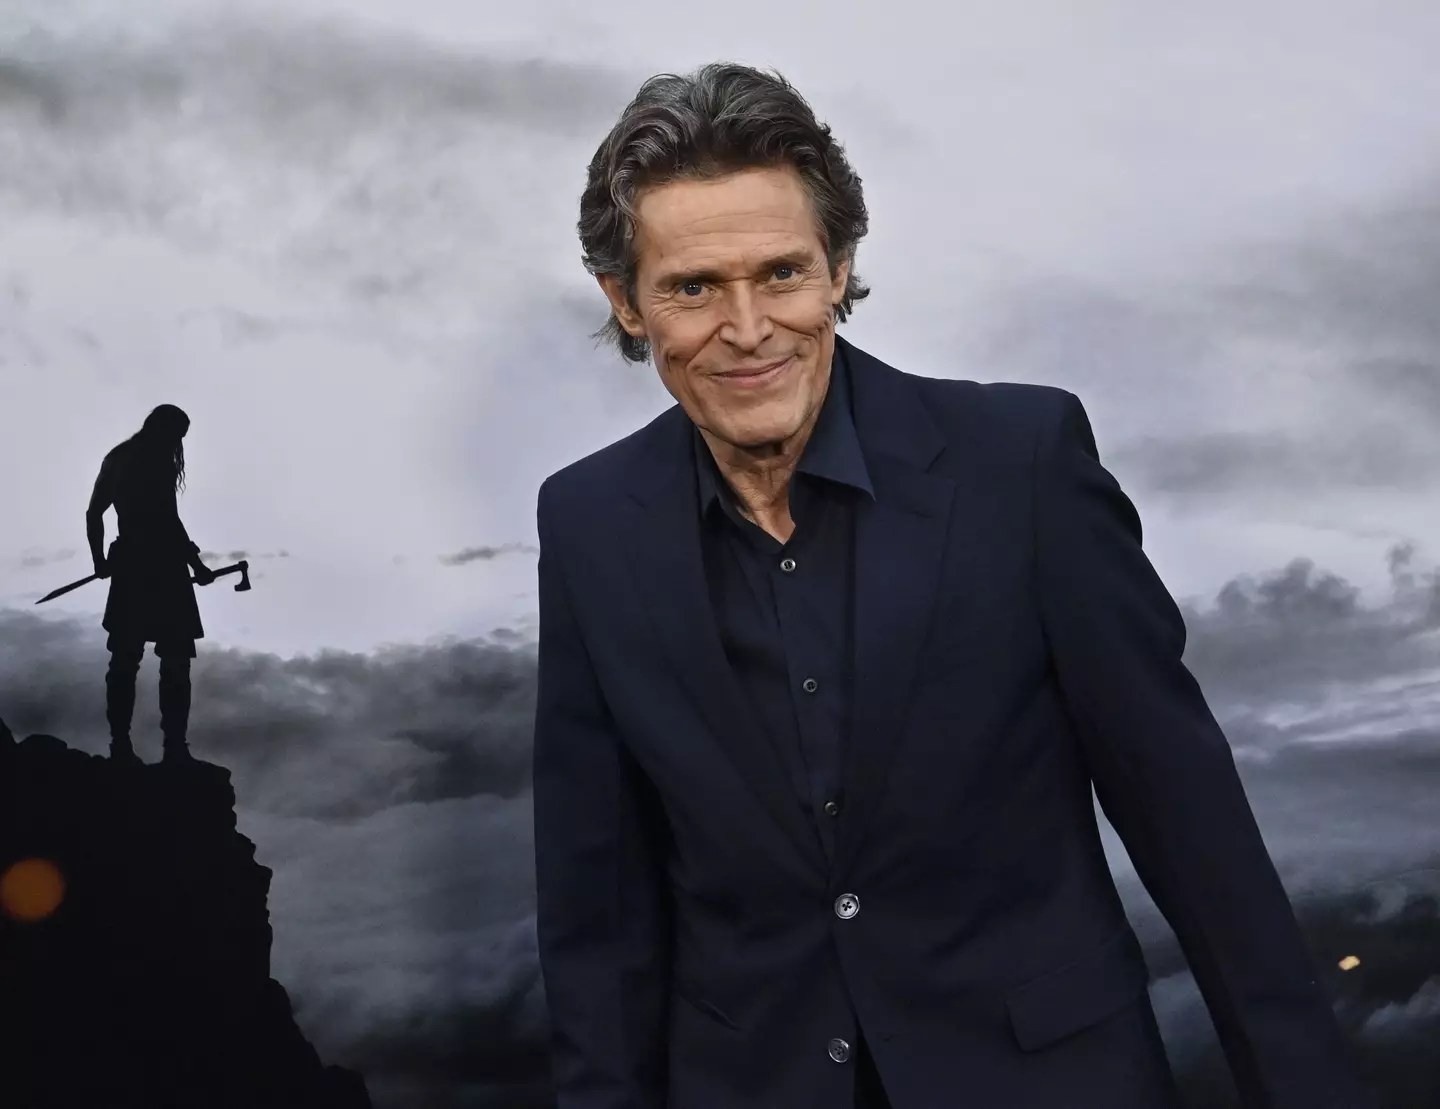 Fans of the actor Willem Dafoe believe his career is worthy of winning a major award.